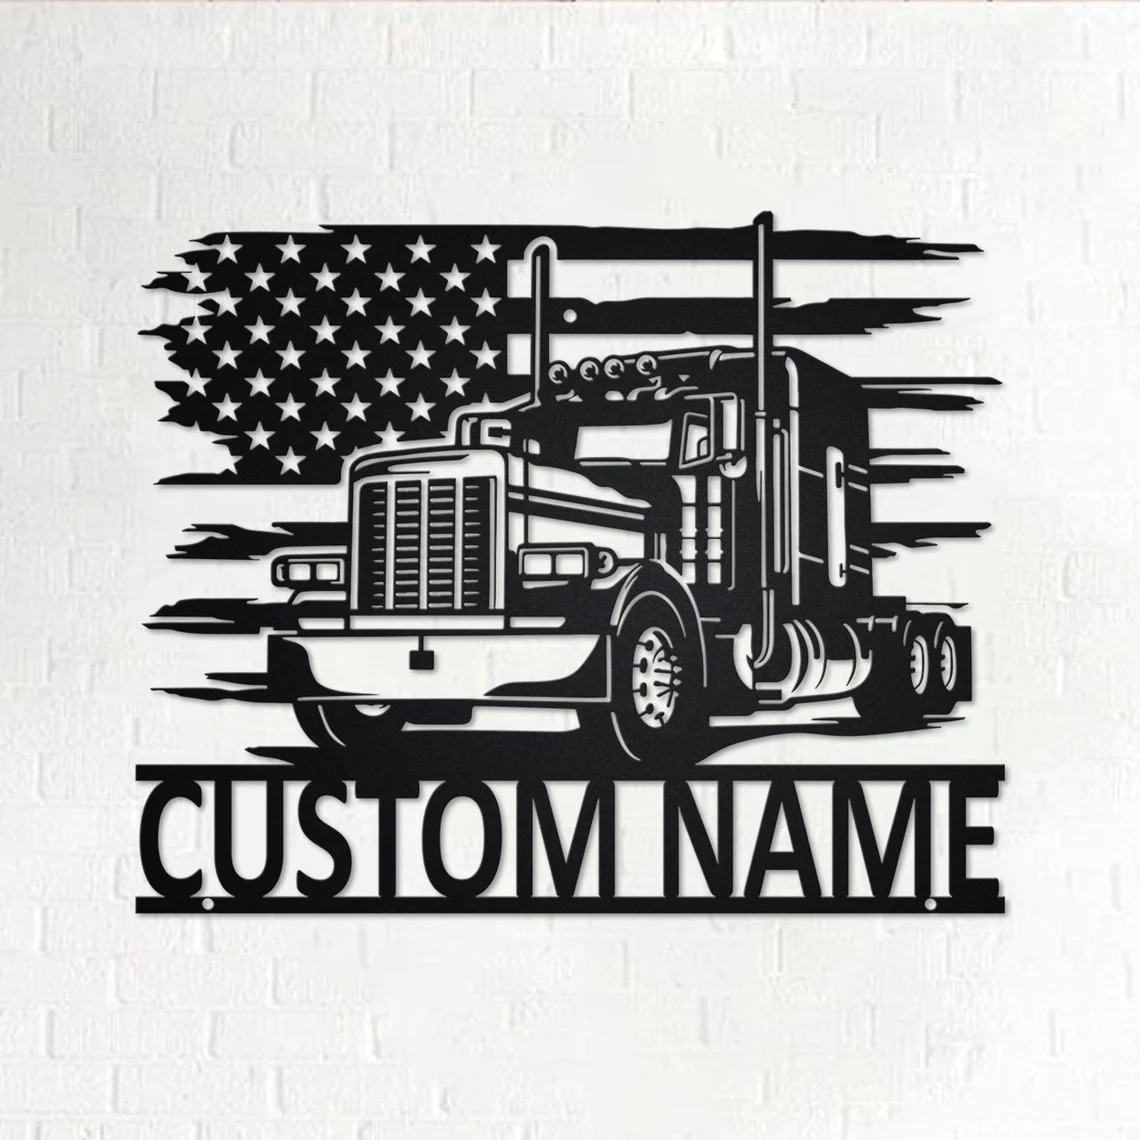 https://images.dinozozo.com/wp-content/uploads/2022/12/Personalized-Us-Big-Truck-Metal-Name-Sign-Home-Decor-Gift-for-Truck-Drivers-1.jpg